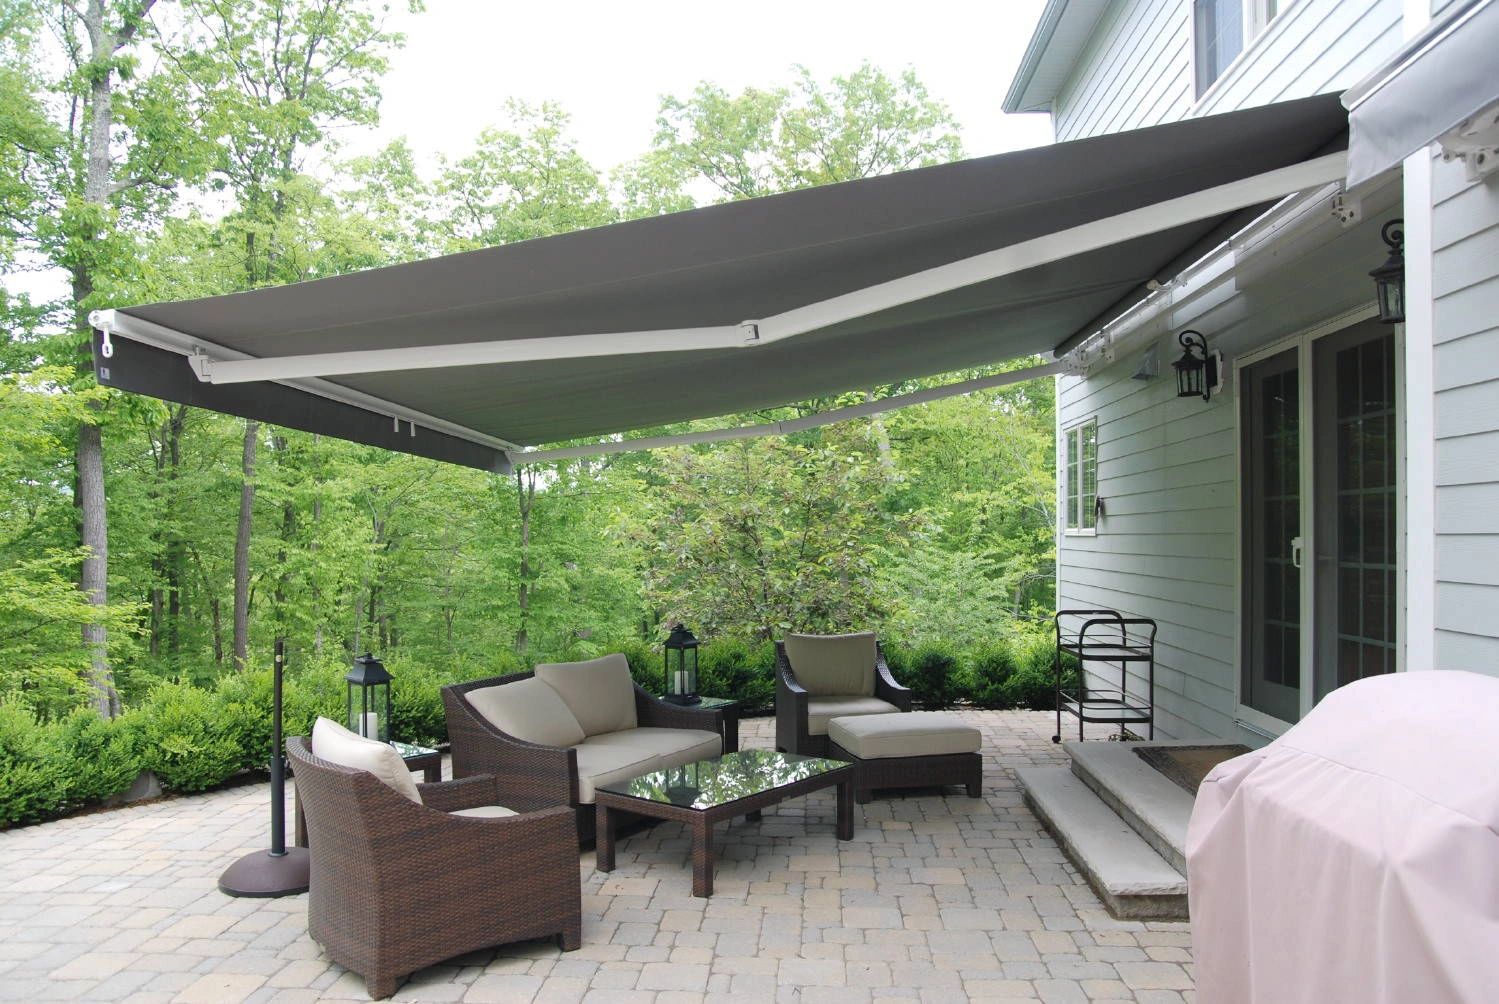  PATIO COVERS  INDIANA AWNINGS 